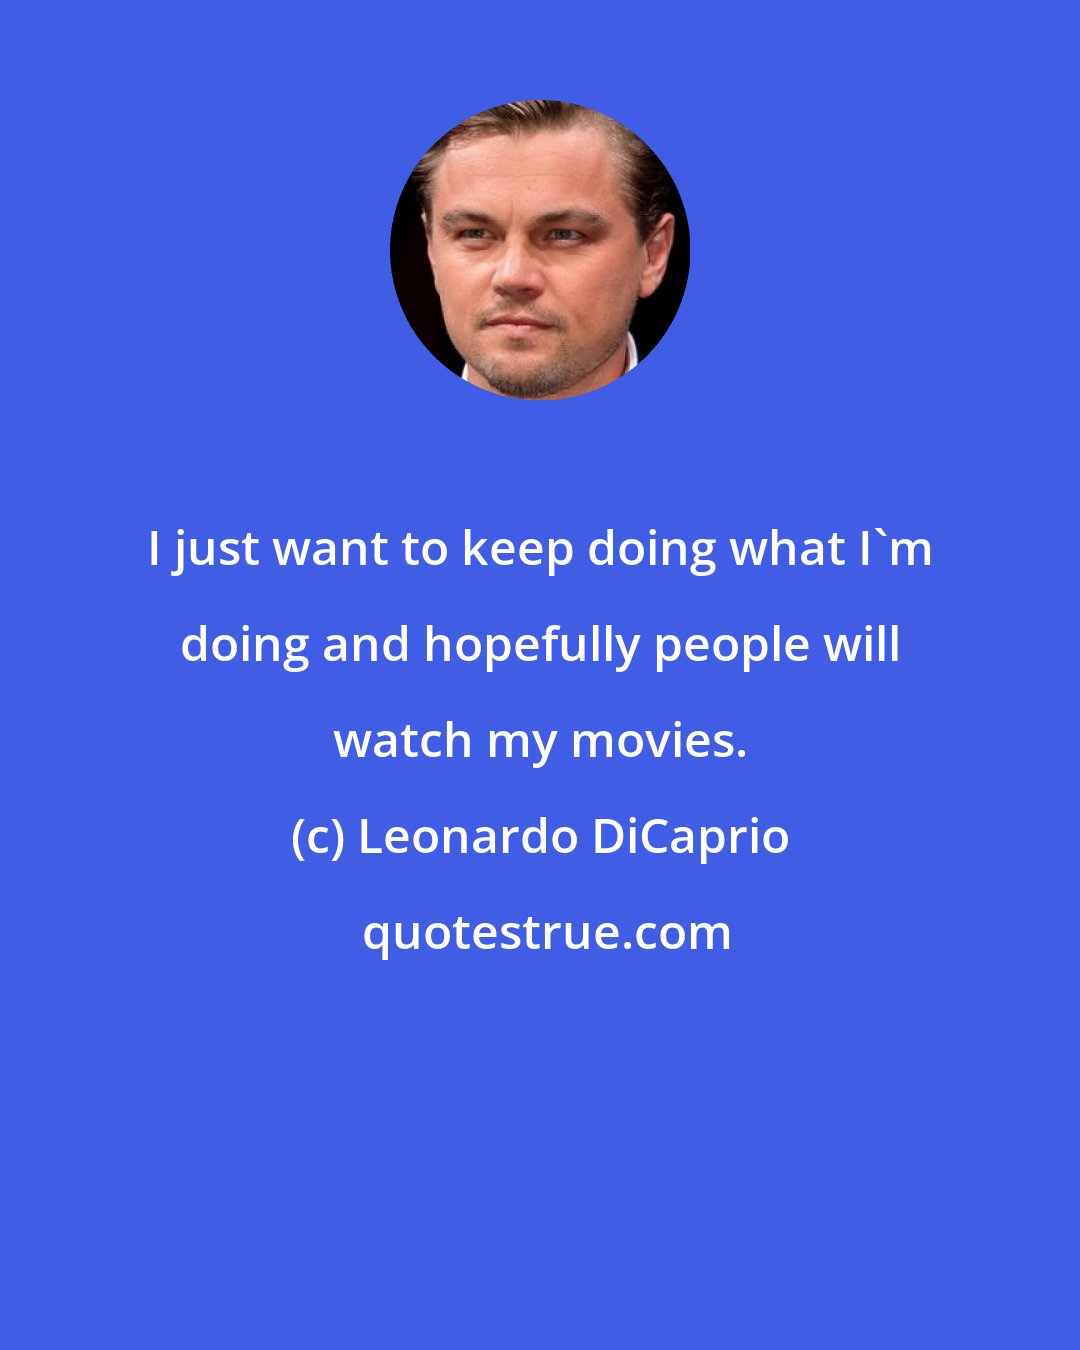 Leonardo DiCaprio: I just want to keep doing what I'm doing and hopefully people will watch my movies.